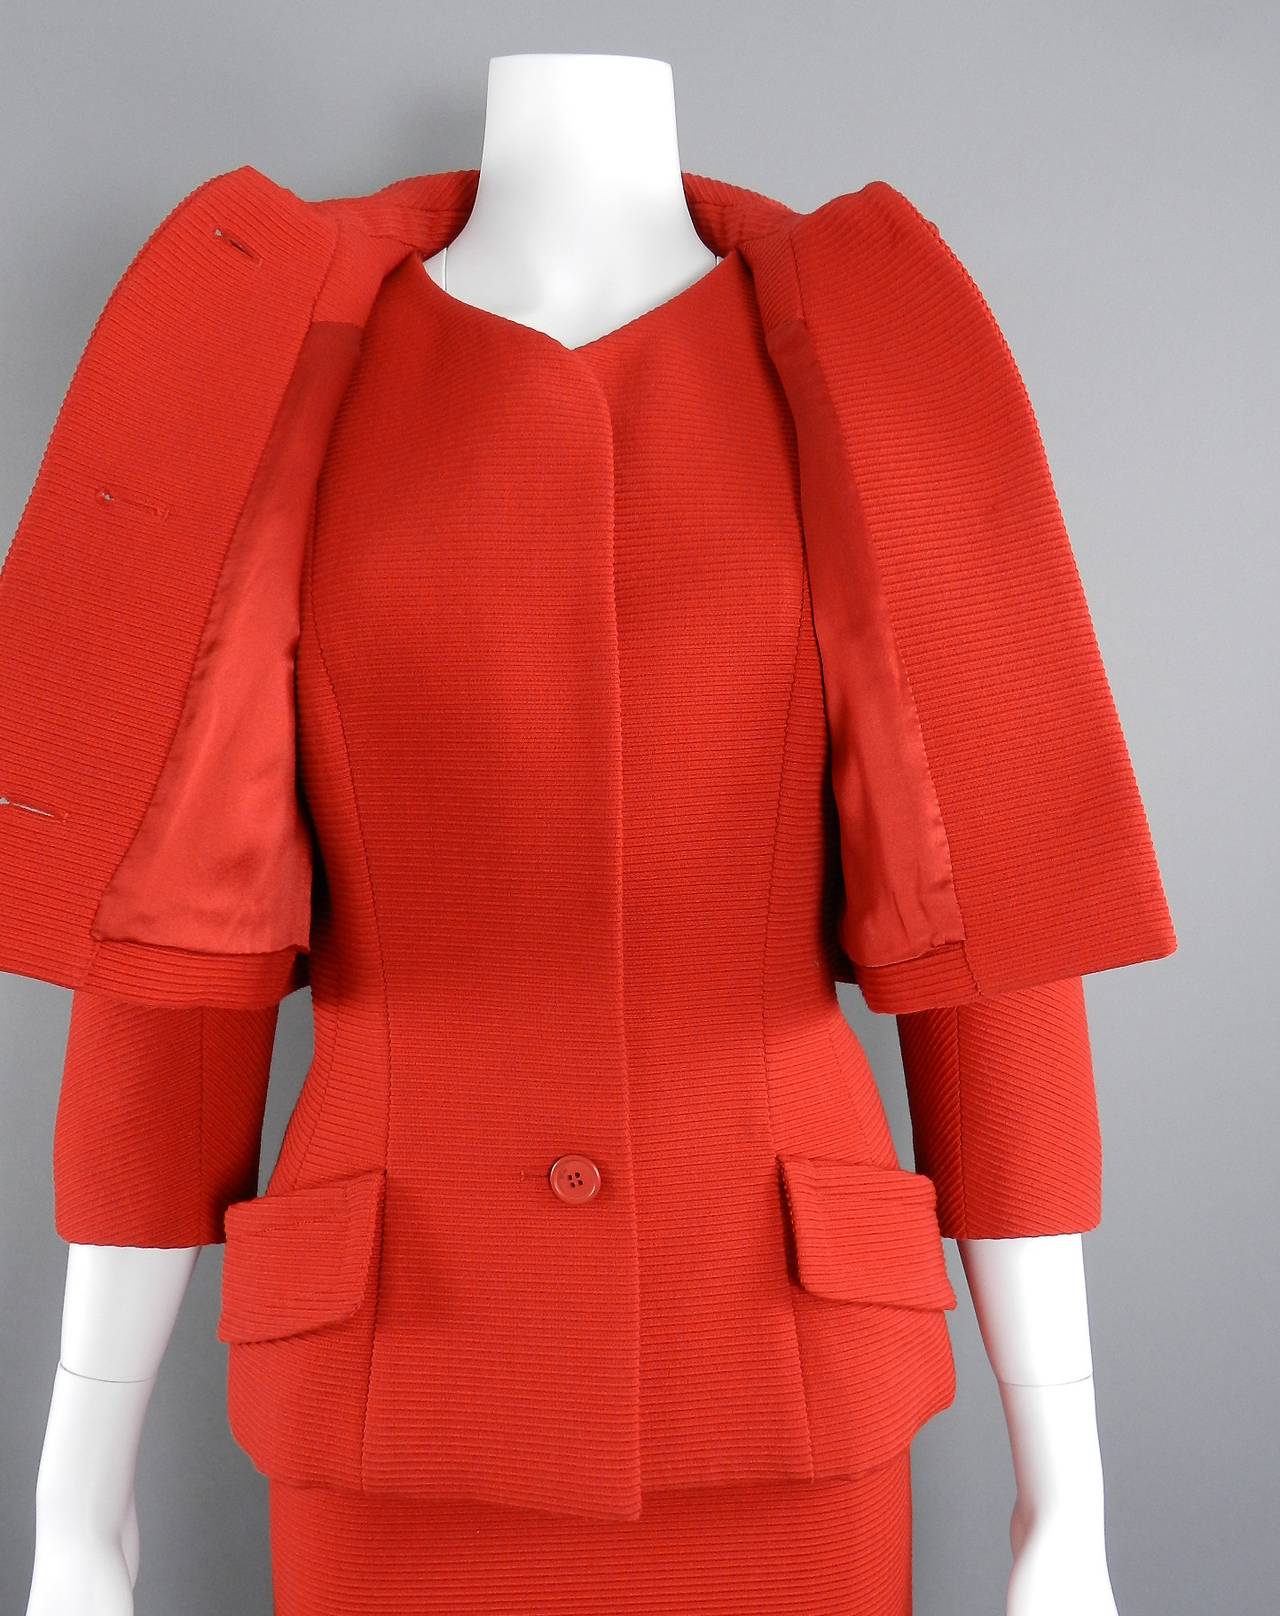 Women's Christian Dior Red Wool Skirt Suit